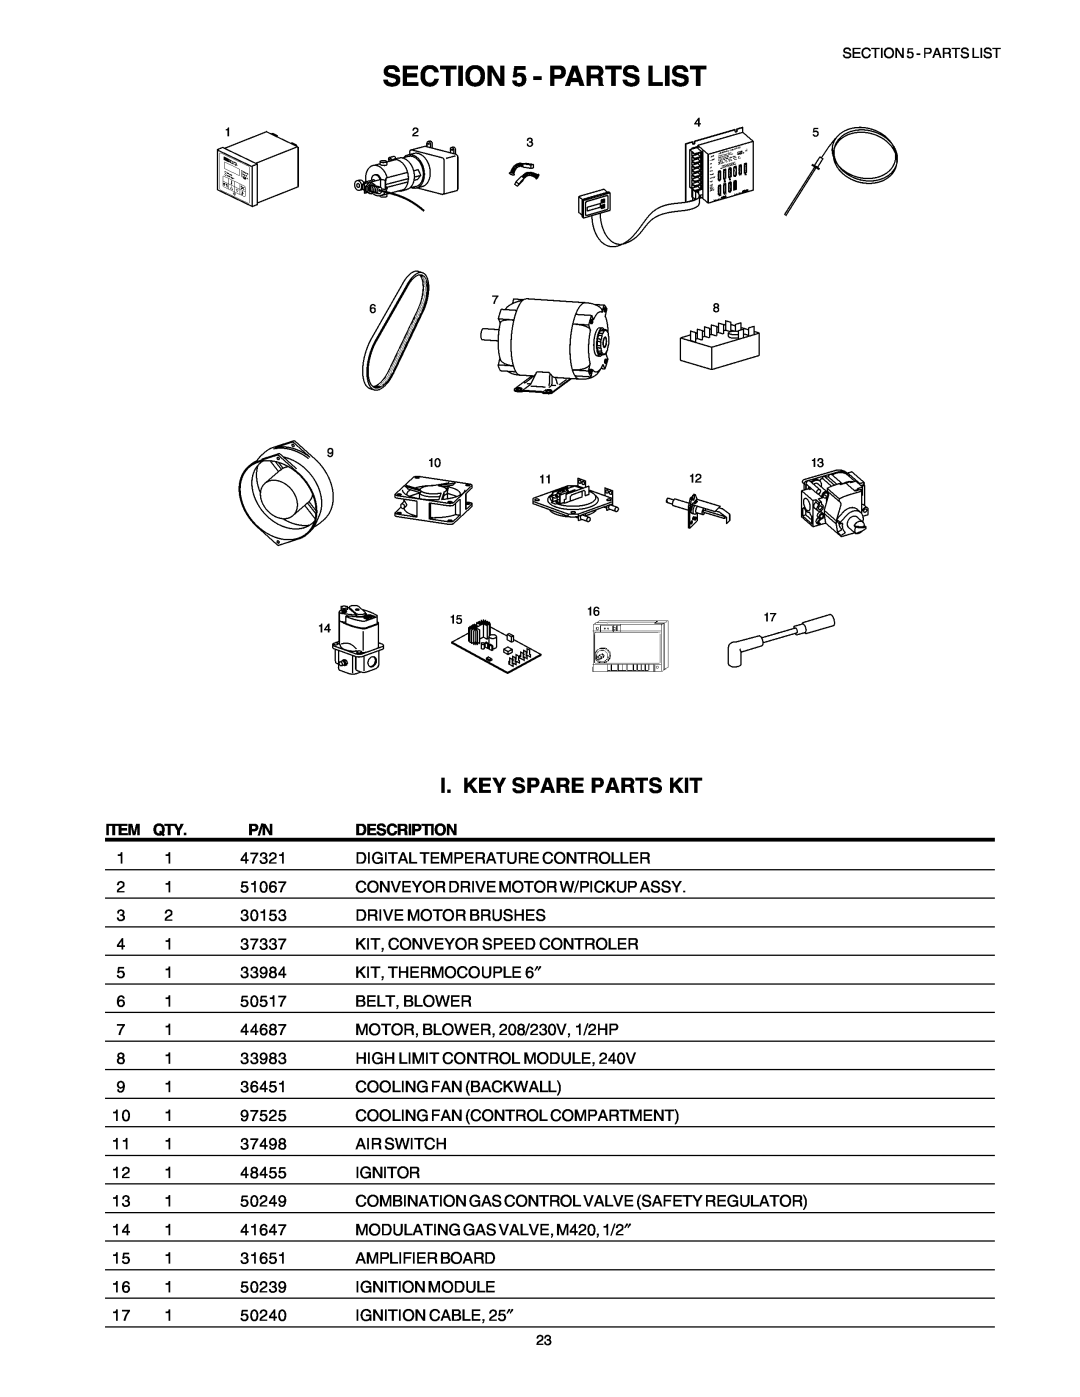 Middleby Marshall PS53GS Gas manual Parts List, I. Key Spare Parts Kit, Description 